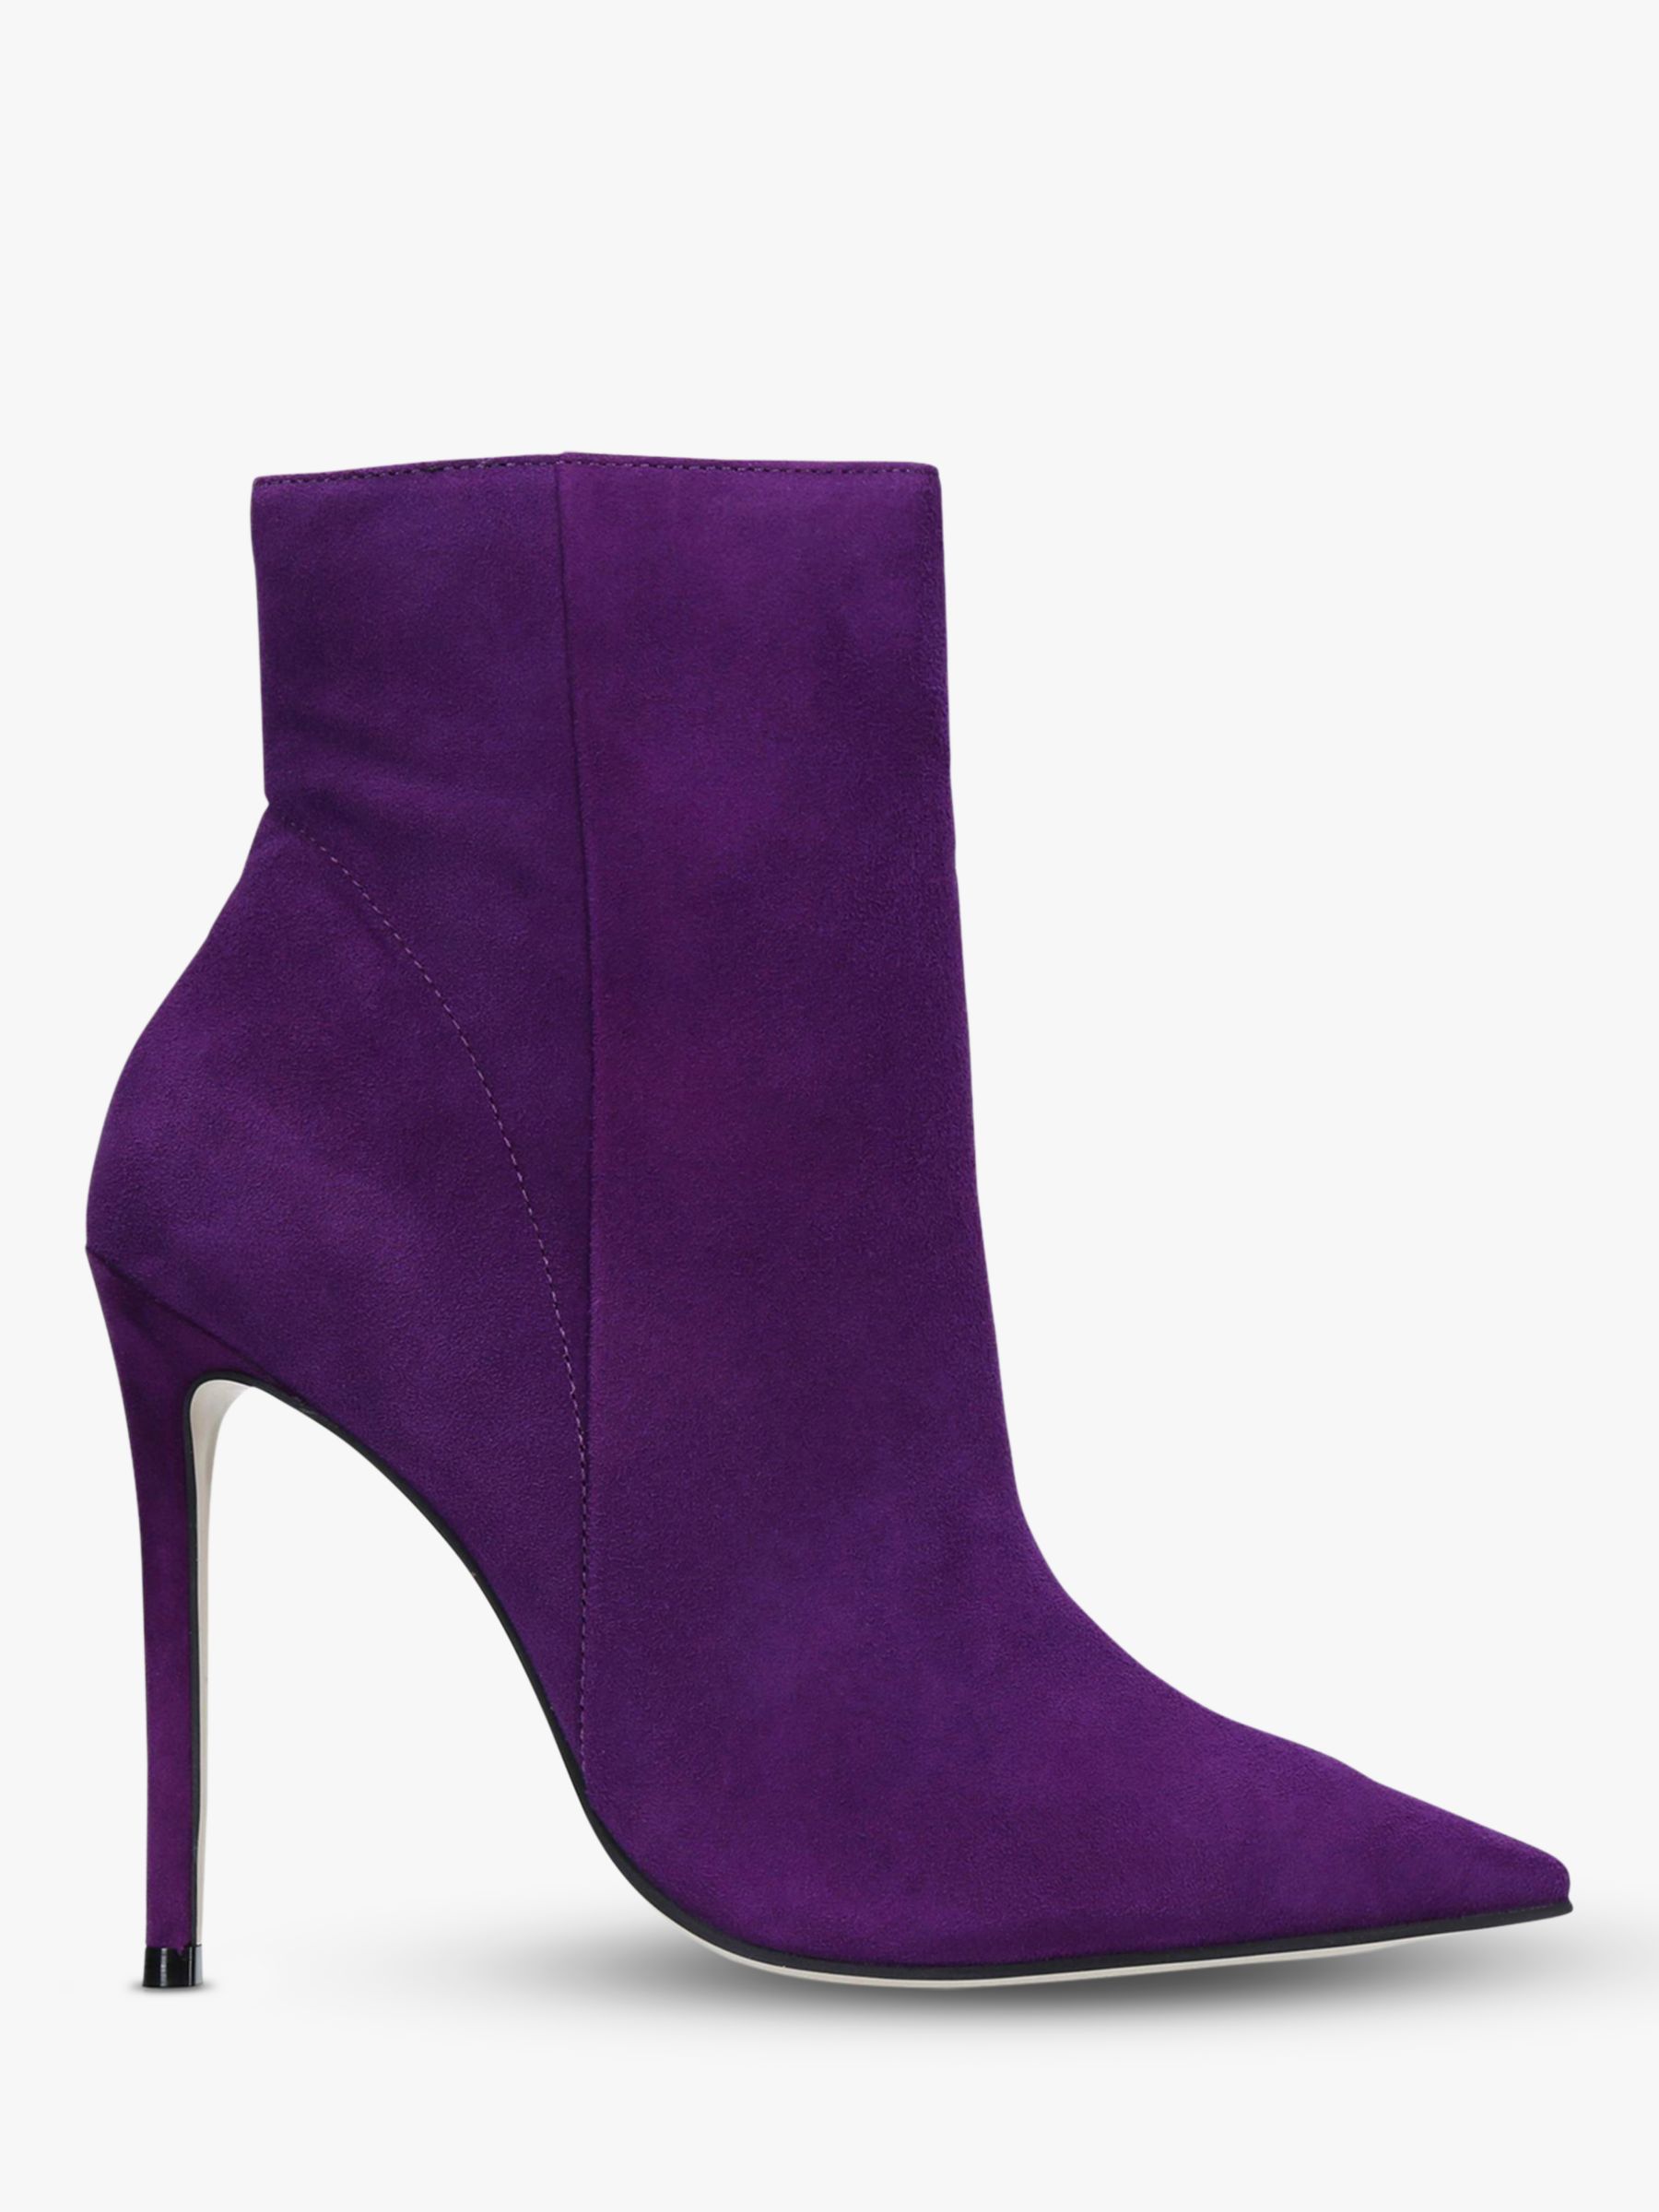 Carvela Spectacular Stiletto Heeled Pointed Toe Ankle Boots, Purple Suede